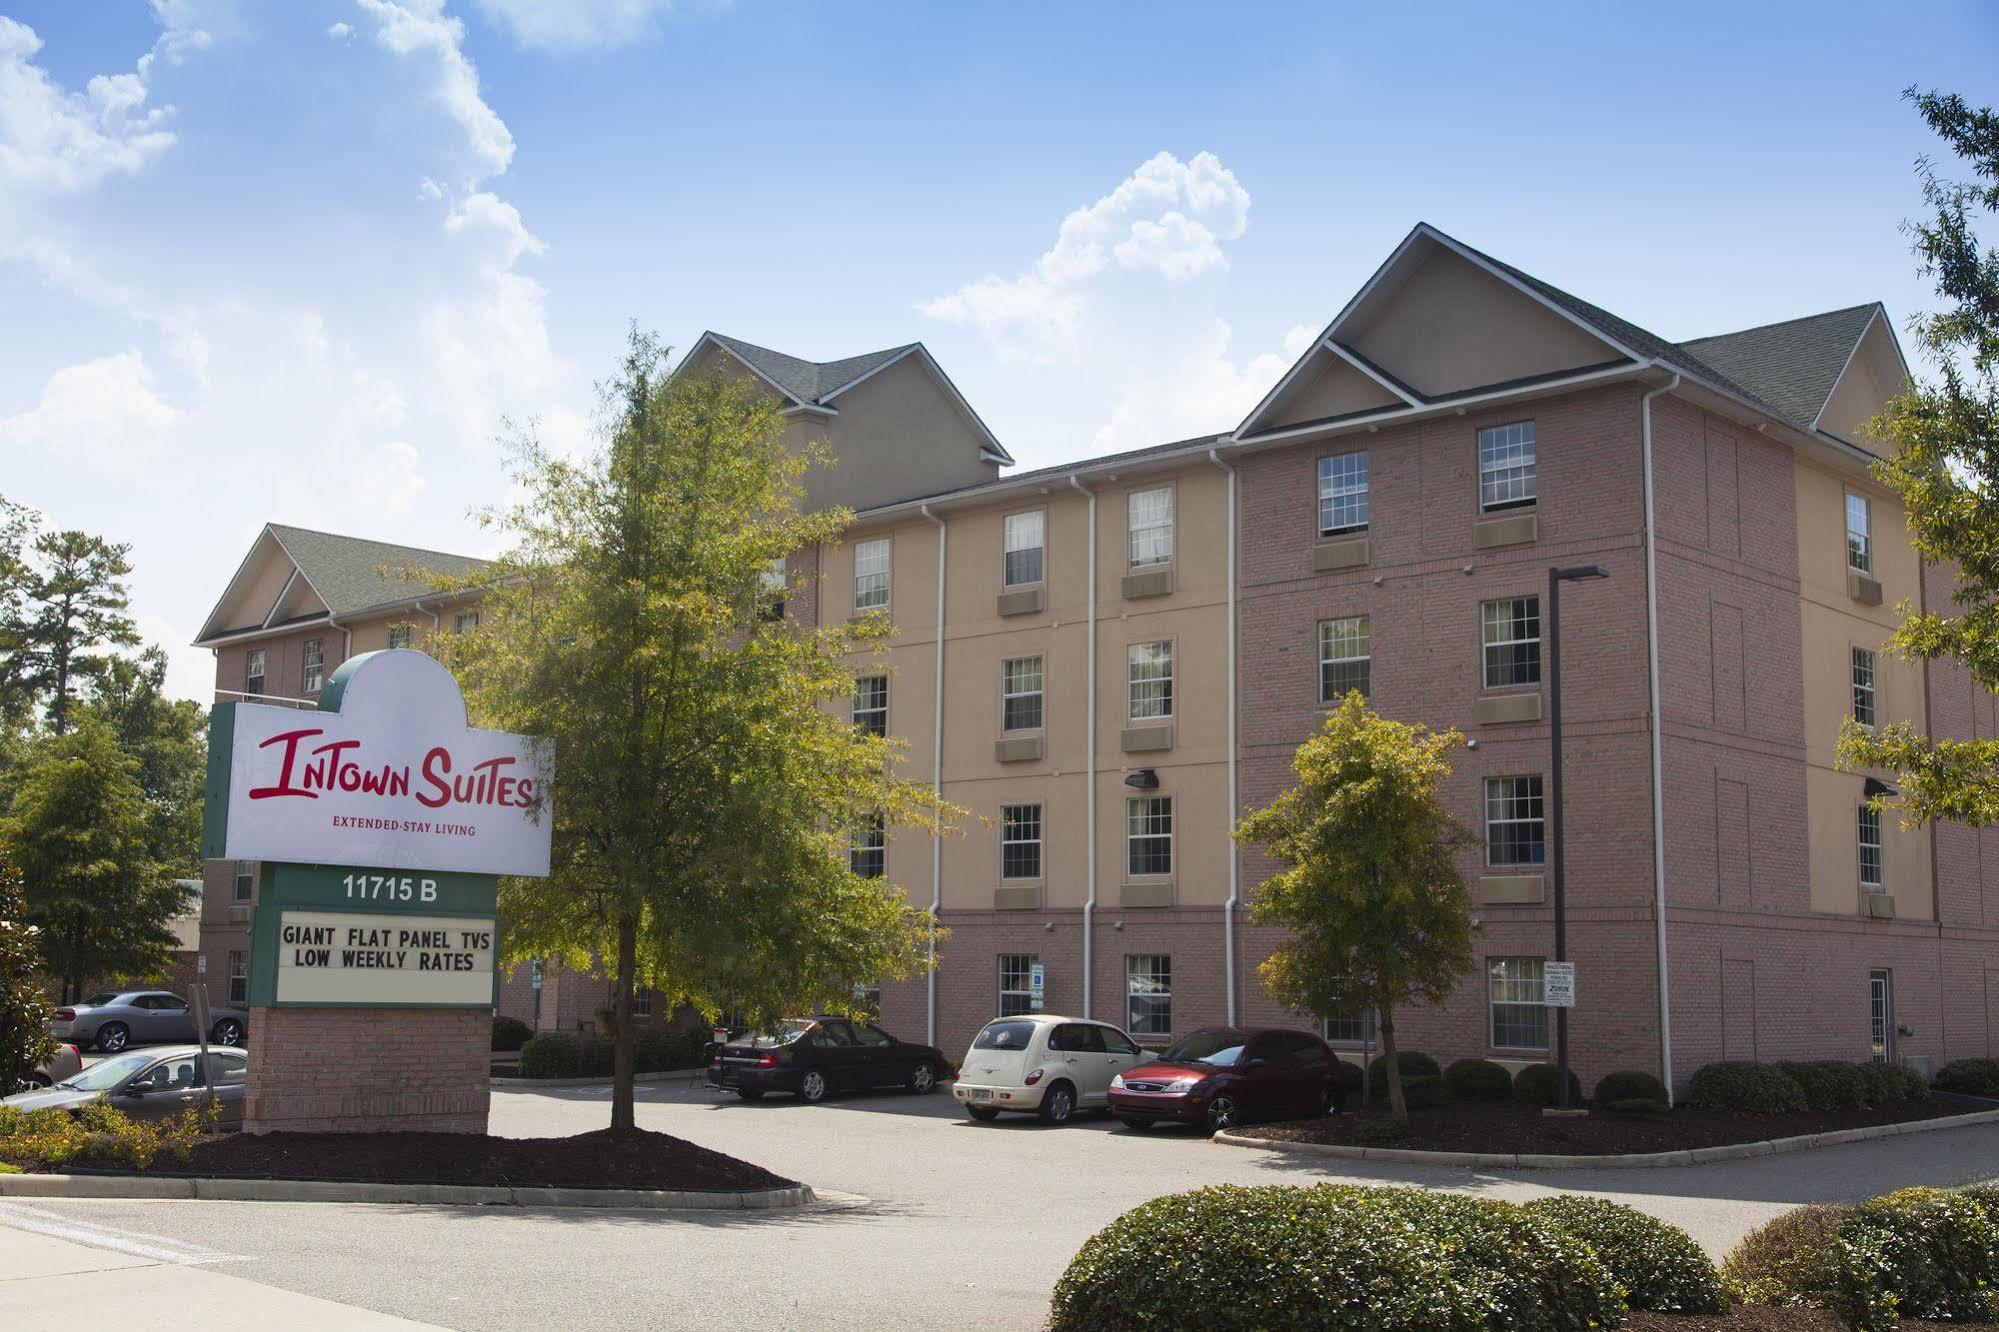 Intown Suites Extended Stay Newport News Va - City Center 外观 照片